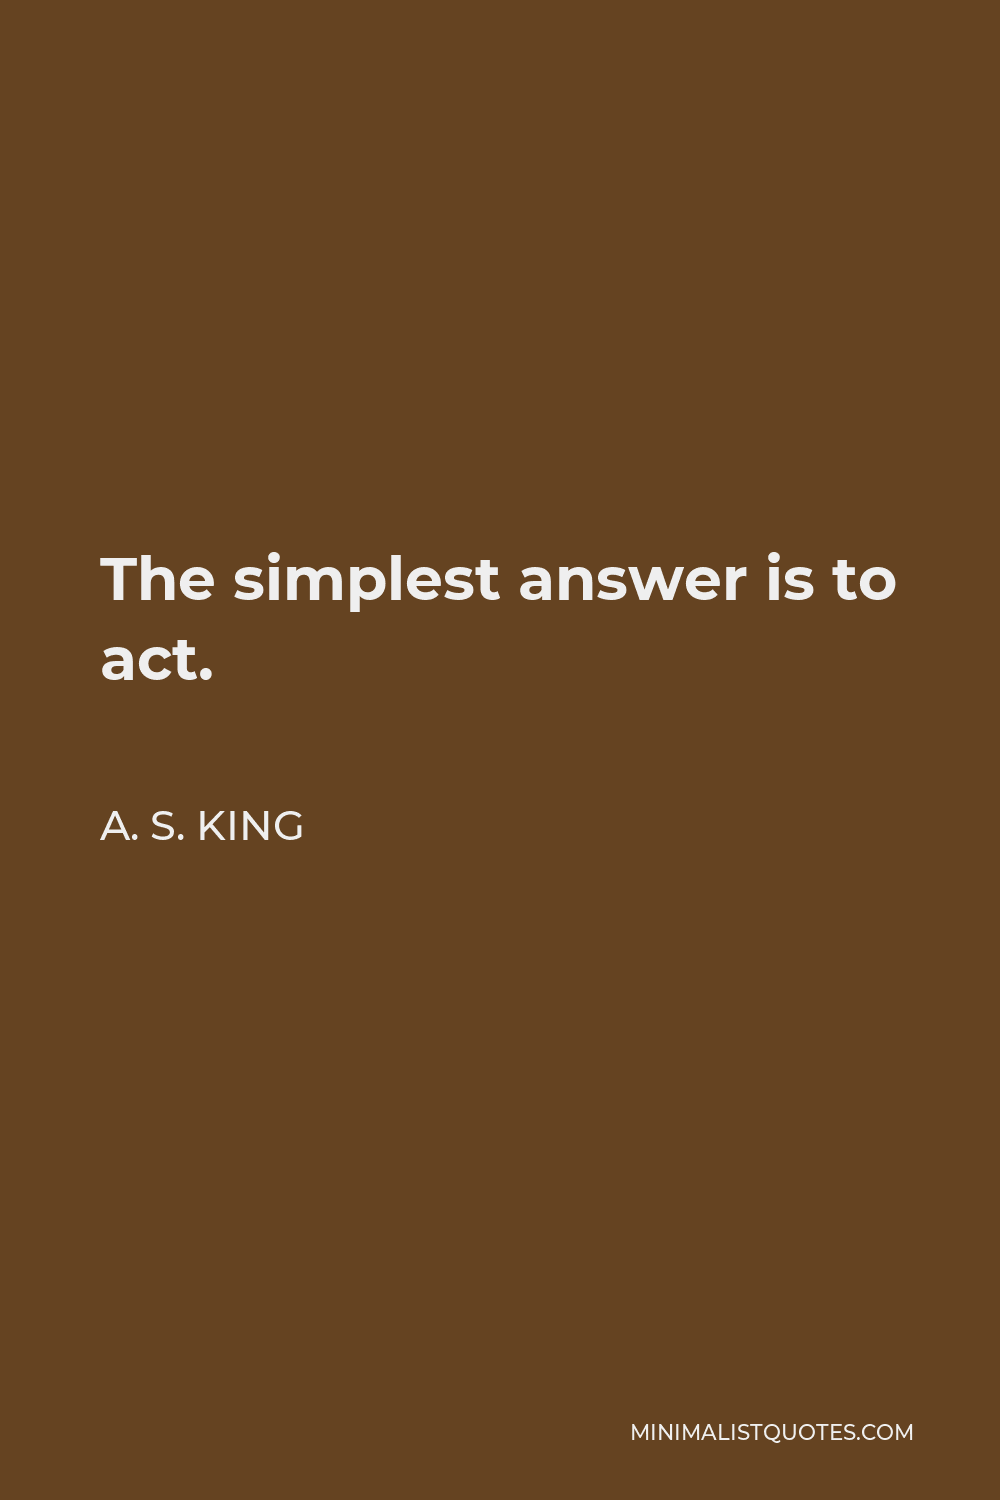 A. S. King Quote - The simplest answer is to act.